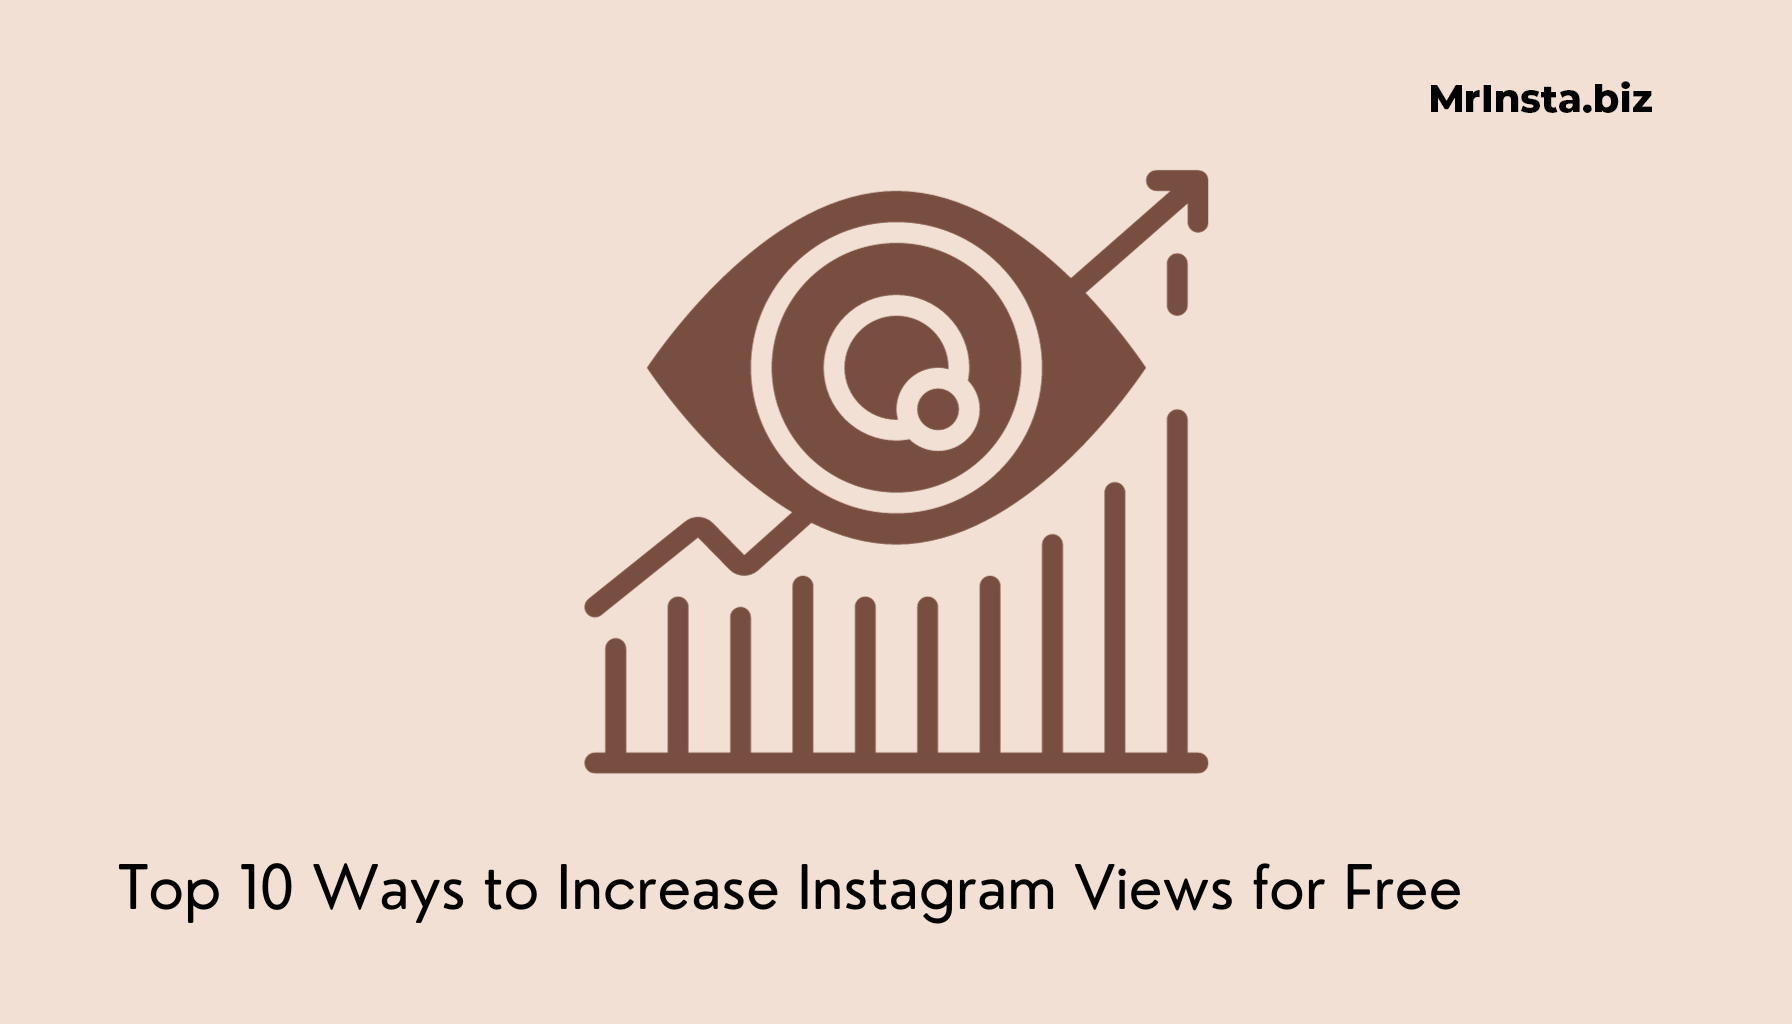 Top 10 Ways to Increase Instagram Views for Free